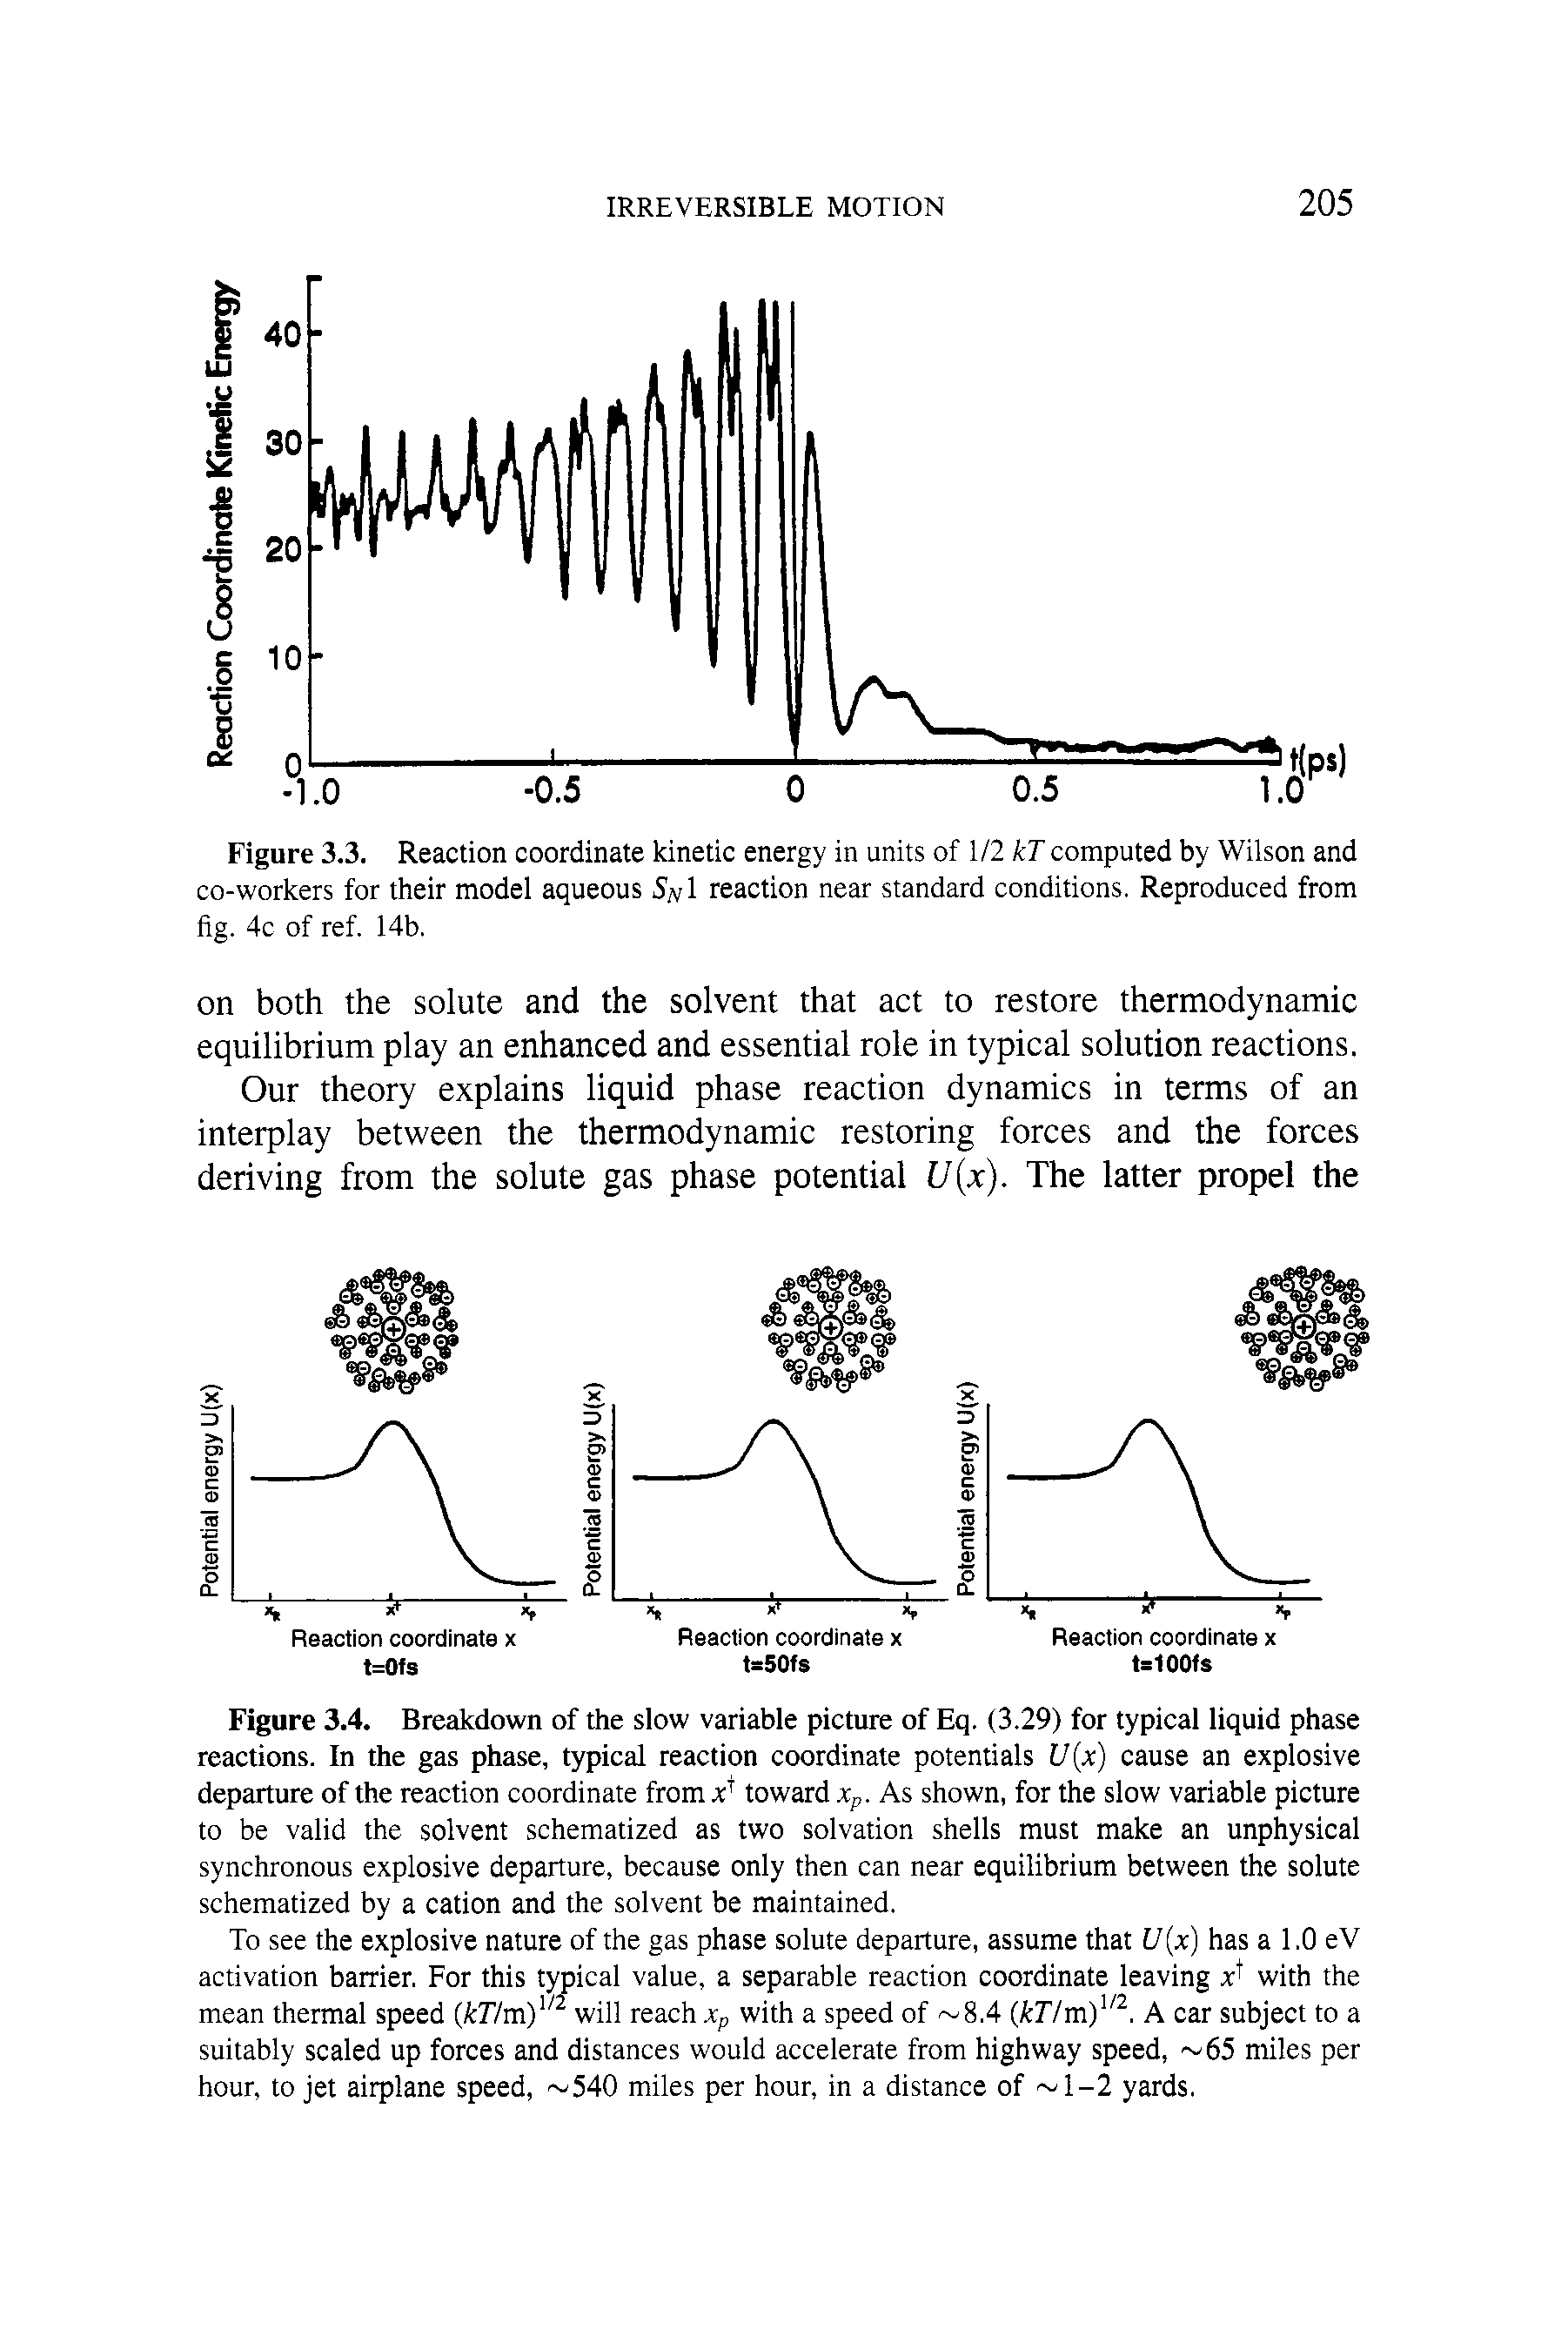 Figure 3.4. Breakdown of the slow variable picture of Eq. (3.29) for typical liquid phase reactions. In the gas phase, typical reaction coordinate potentials U x) cause an explosive departure of the reaction coordinate from toward Xp. As shown, for the slow variable picture to be valid the solvent schematized as two solvation shells must make an unphysical synchronous explosive departure, because only then can near equilibrium between the solute schematized by a cation and the solvent be maintained.